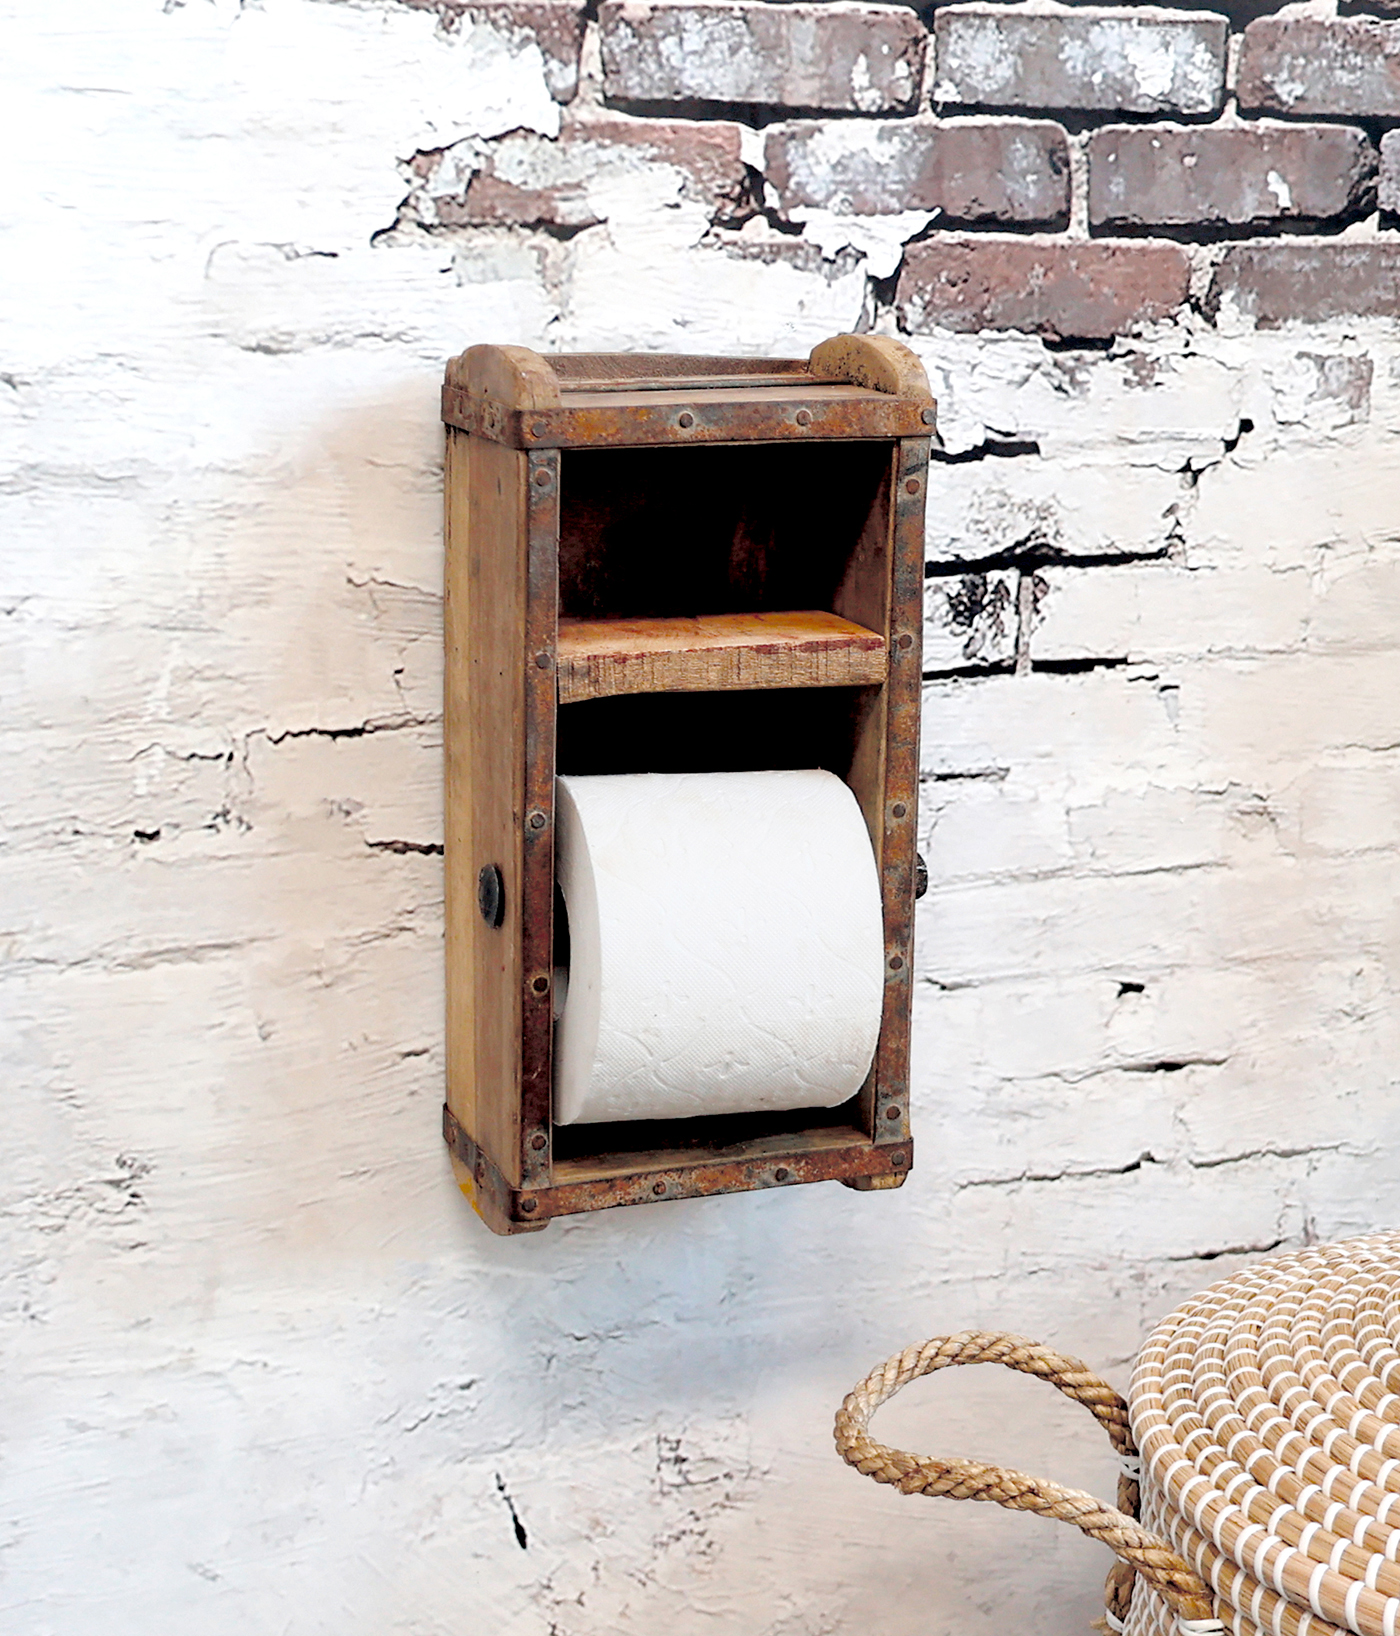 Brick Rustic Toile toll holder for New England vintage interiors and styling